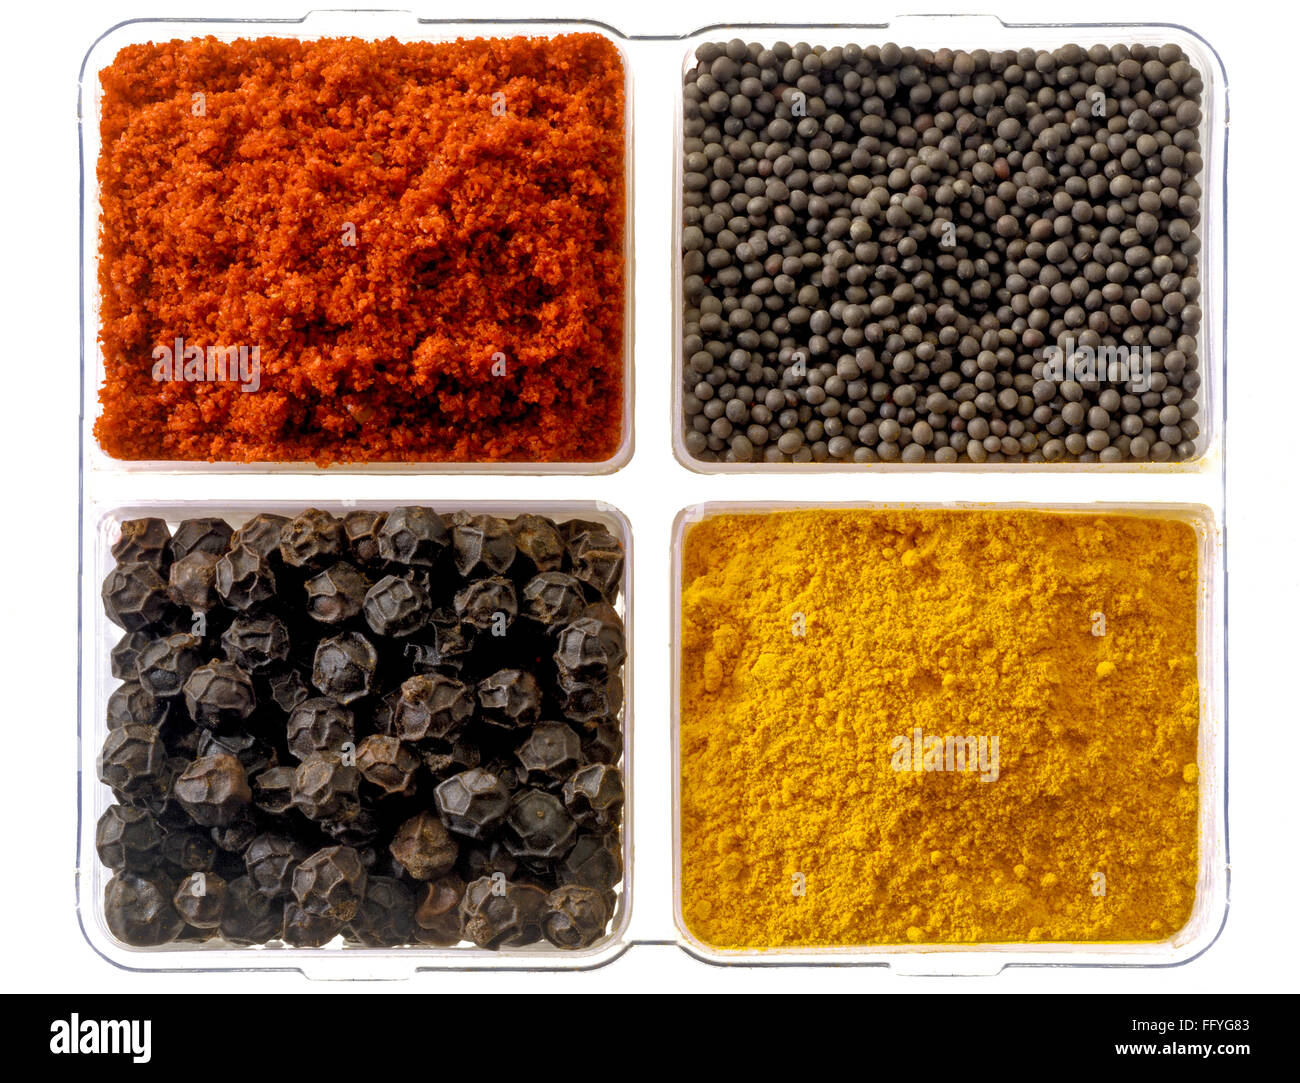 Spices chilly and turmeric powder mustard seeds and black pepper ; India Stock Photo